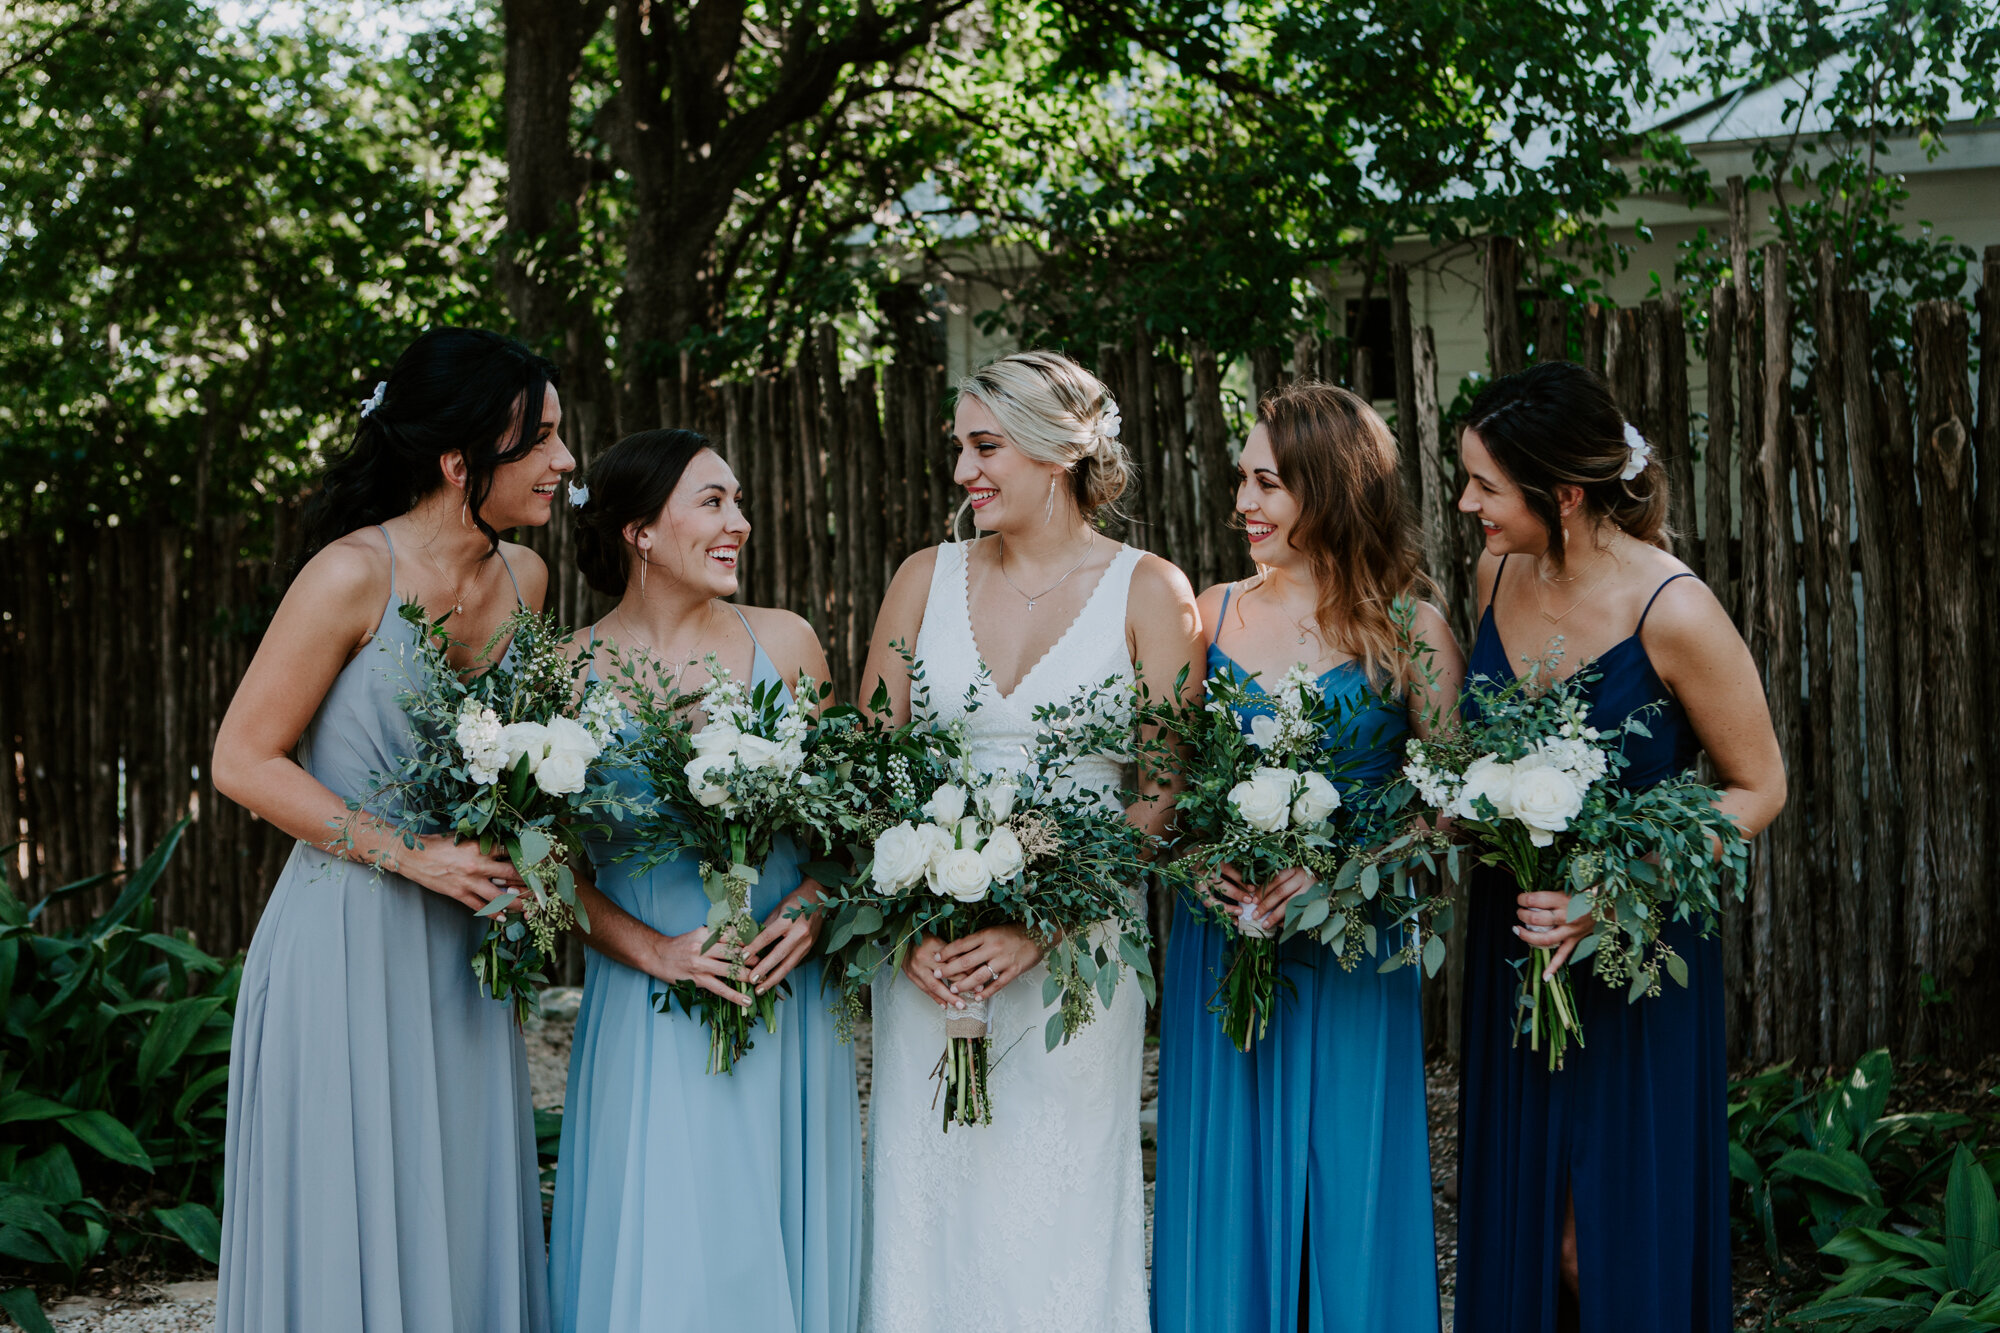 Bride with bridesmaids portraits. Radiant Bohemian Hill Country Wedding at Gruene Estate in New Braunfels, TX